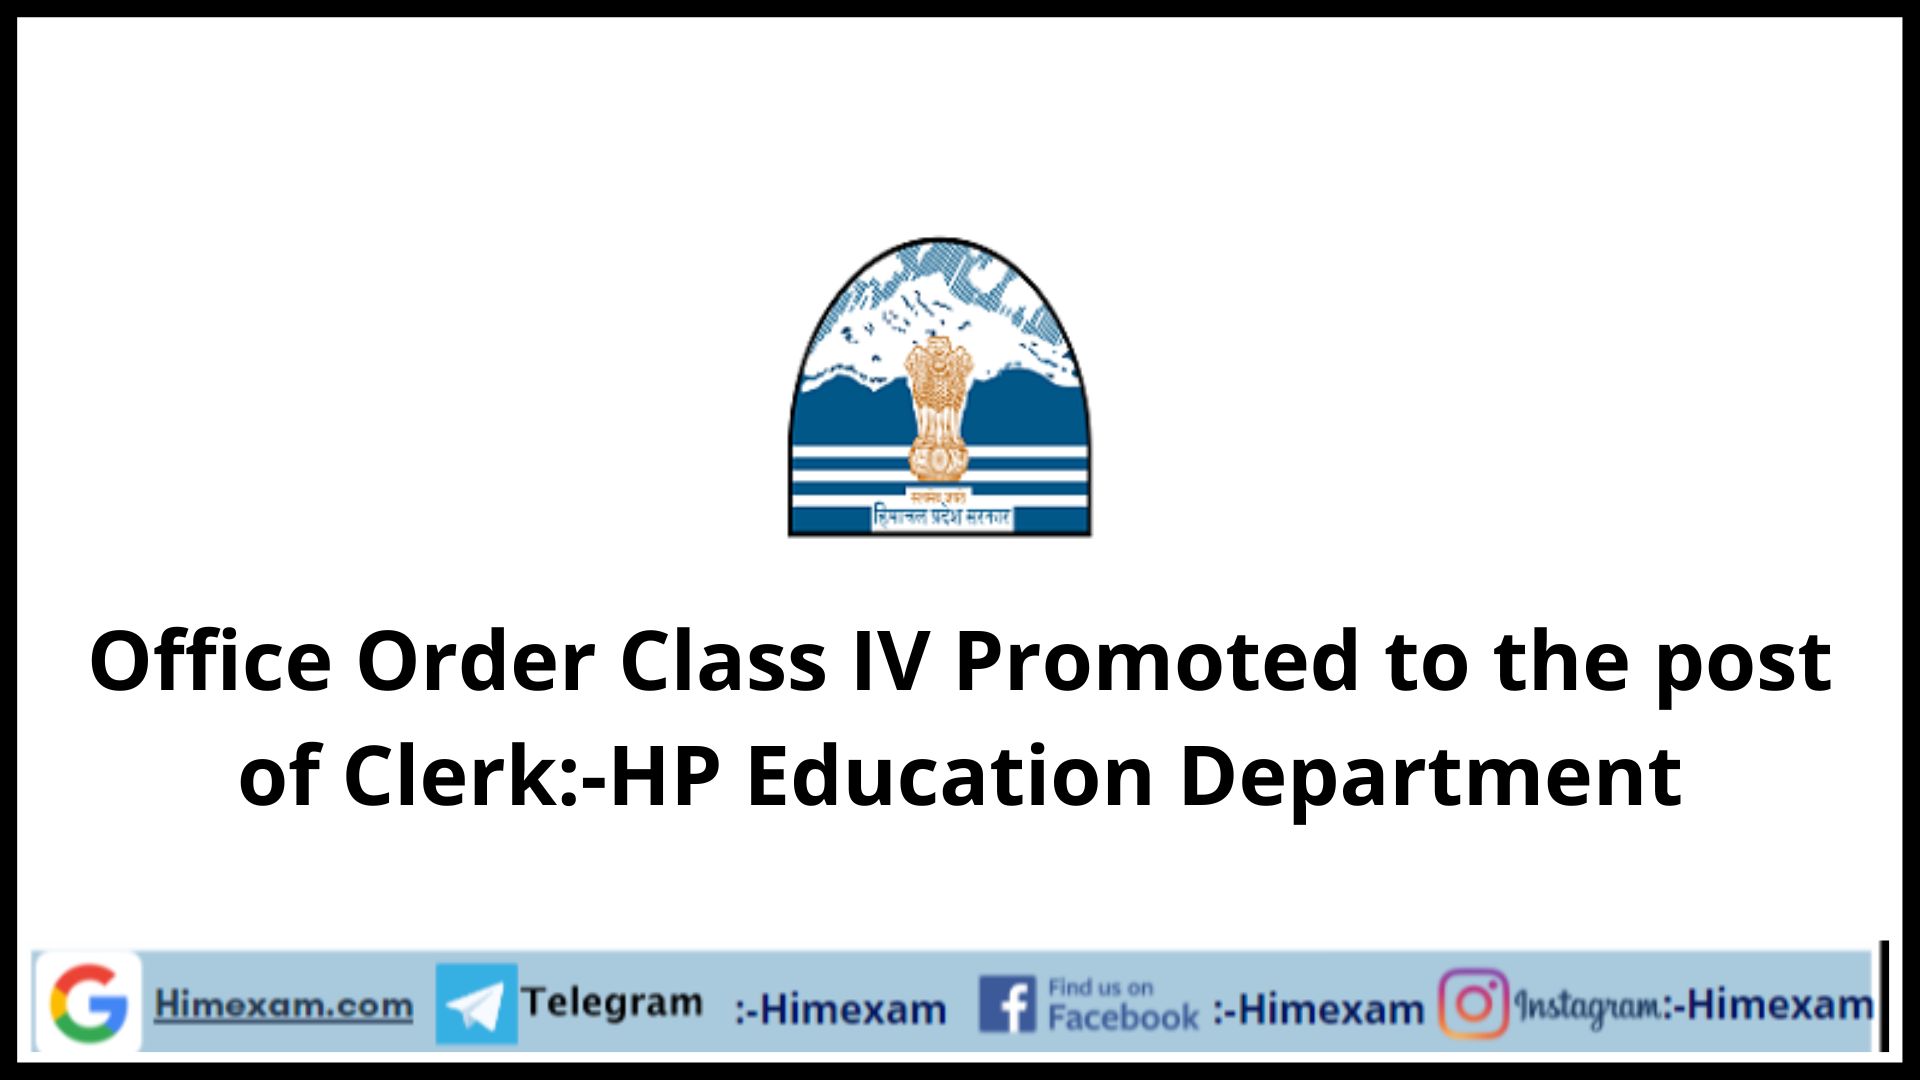 Office Order Class IV Promoted to the post of Clerk:-HP Education Department